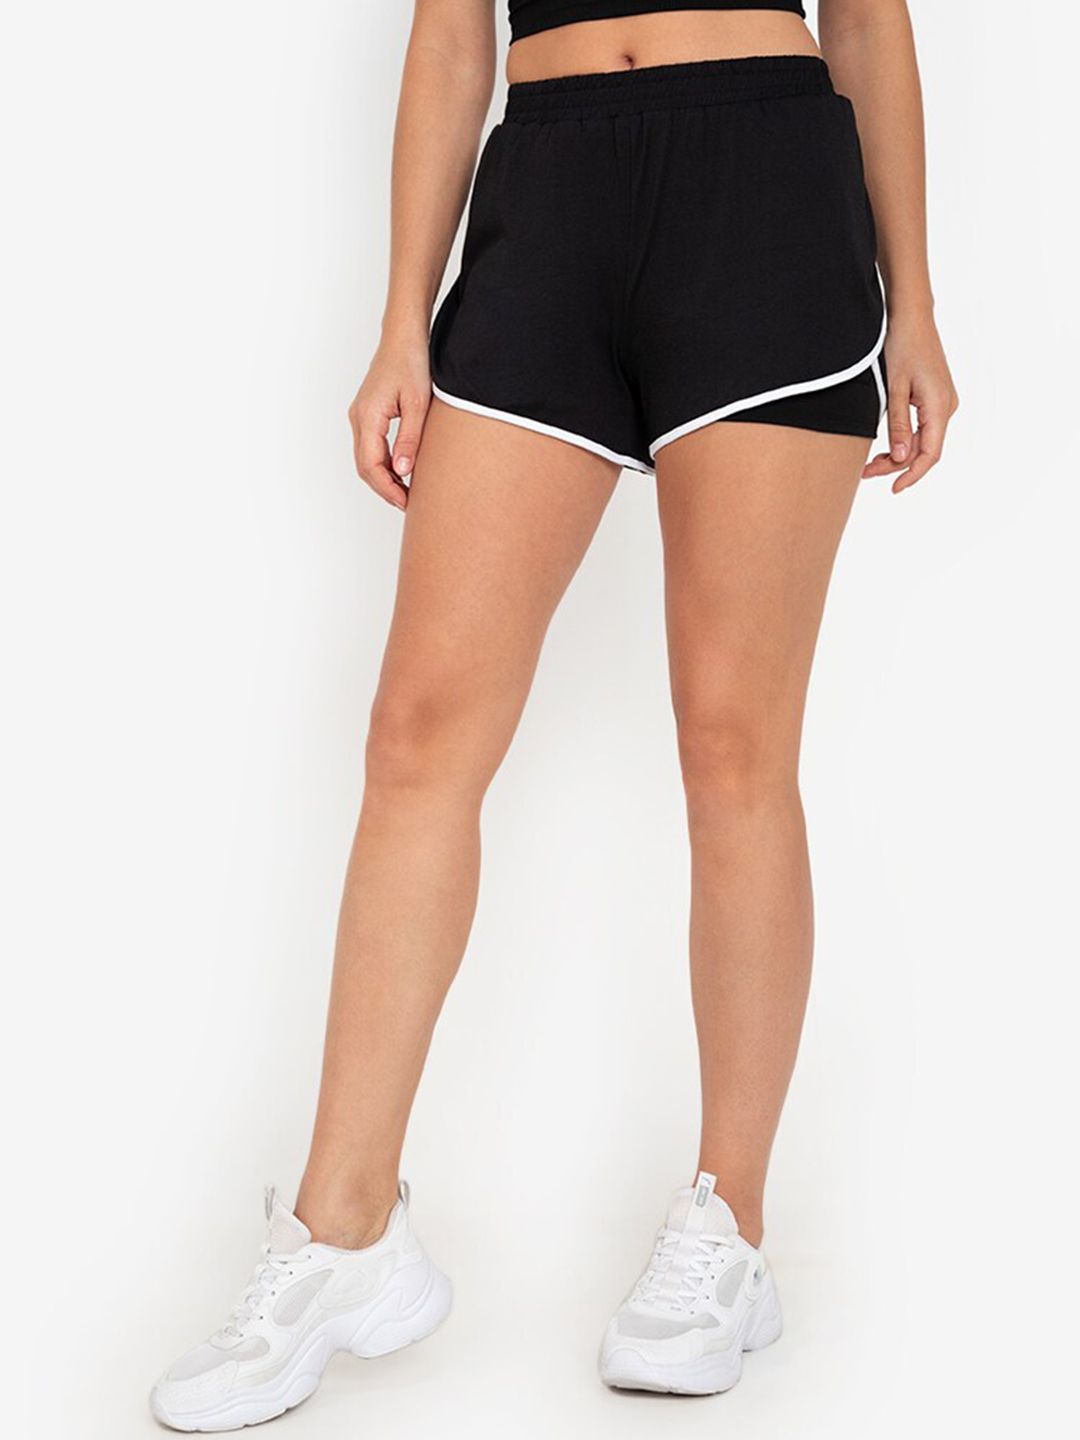 ZALORA ACTIVE Women Black High-Rise Training or Gym Sports Shorts Price in India